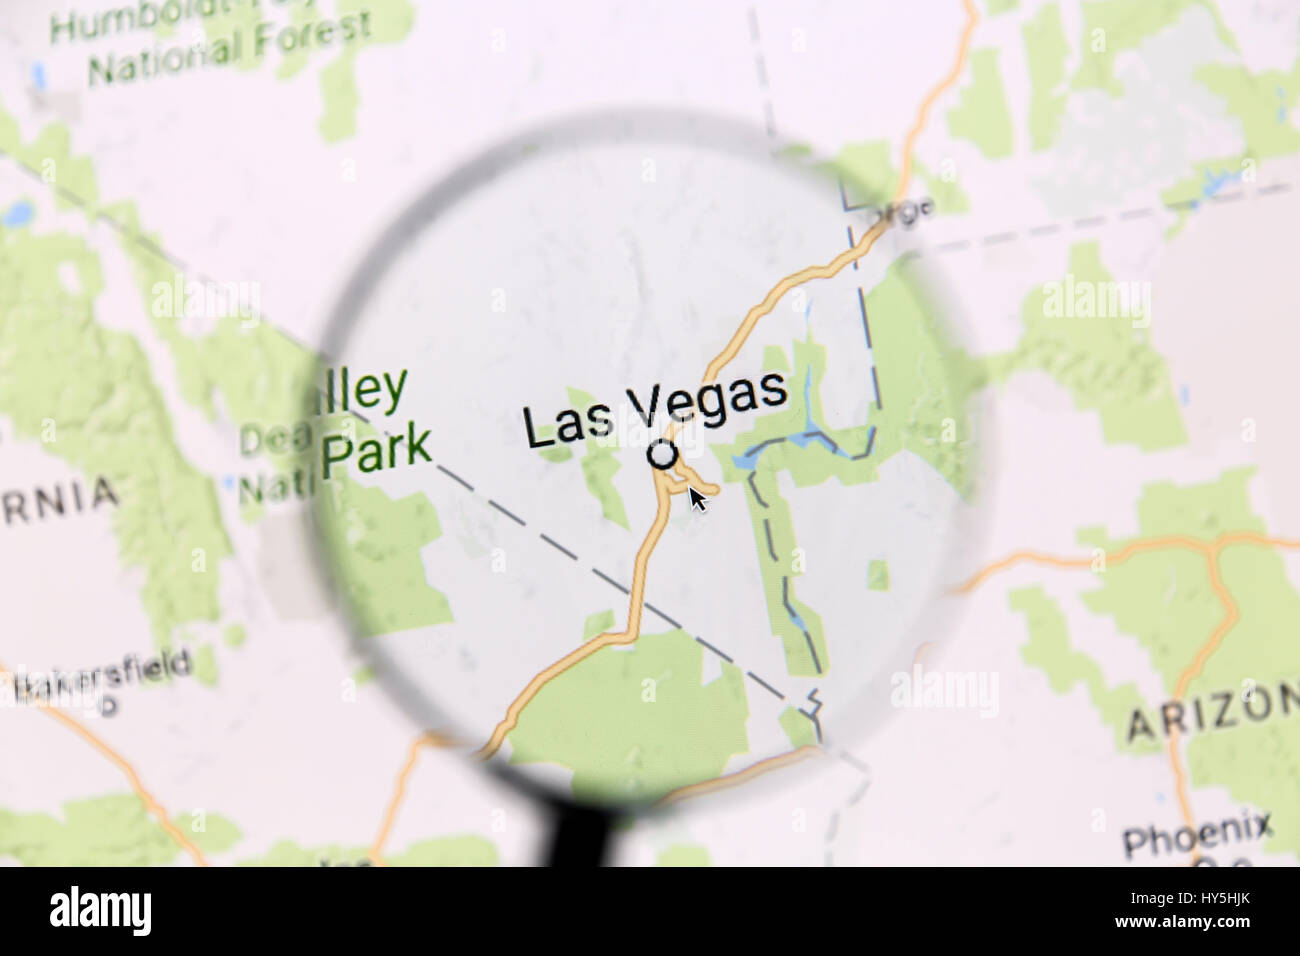 Google Map of Las Vegas, Nevada, USA - Nations Online Project